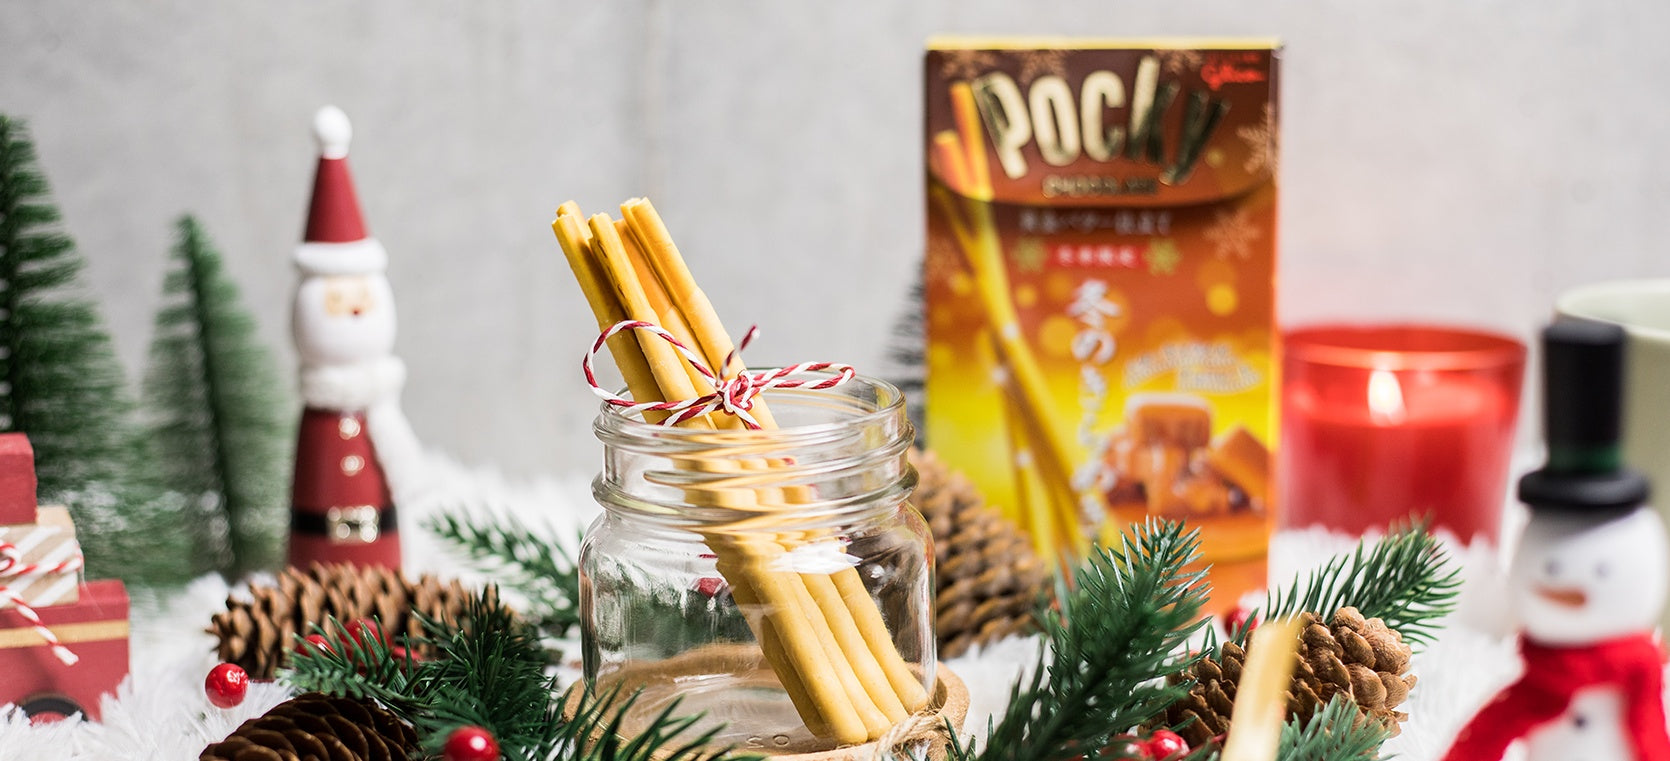 Pocky is every occasion: from daily to party